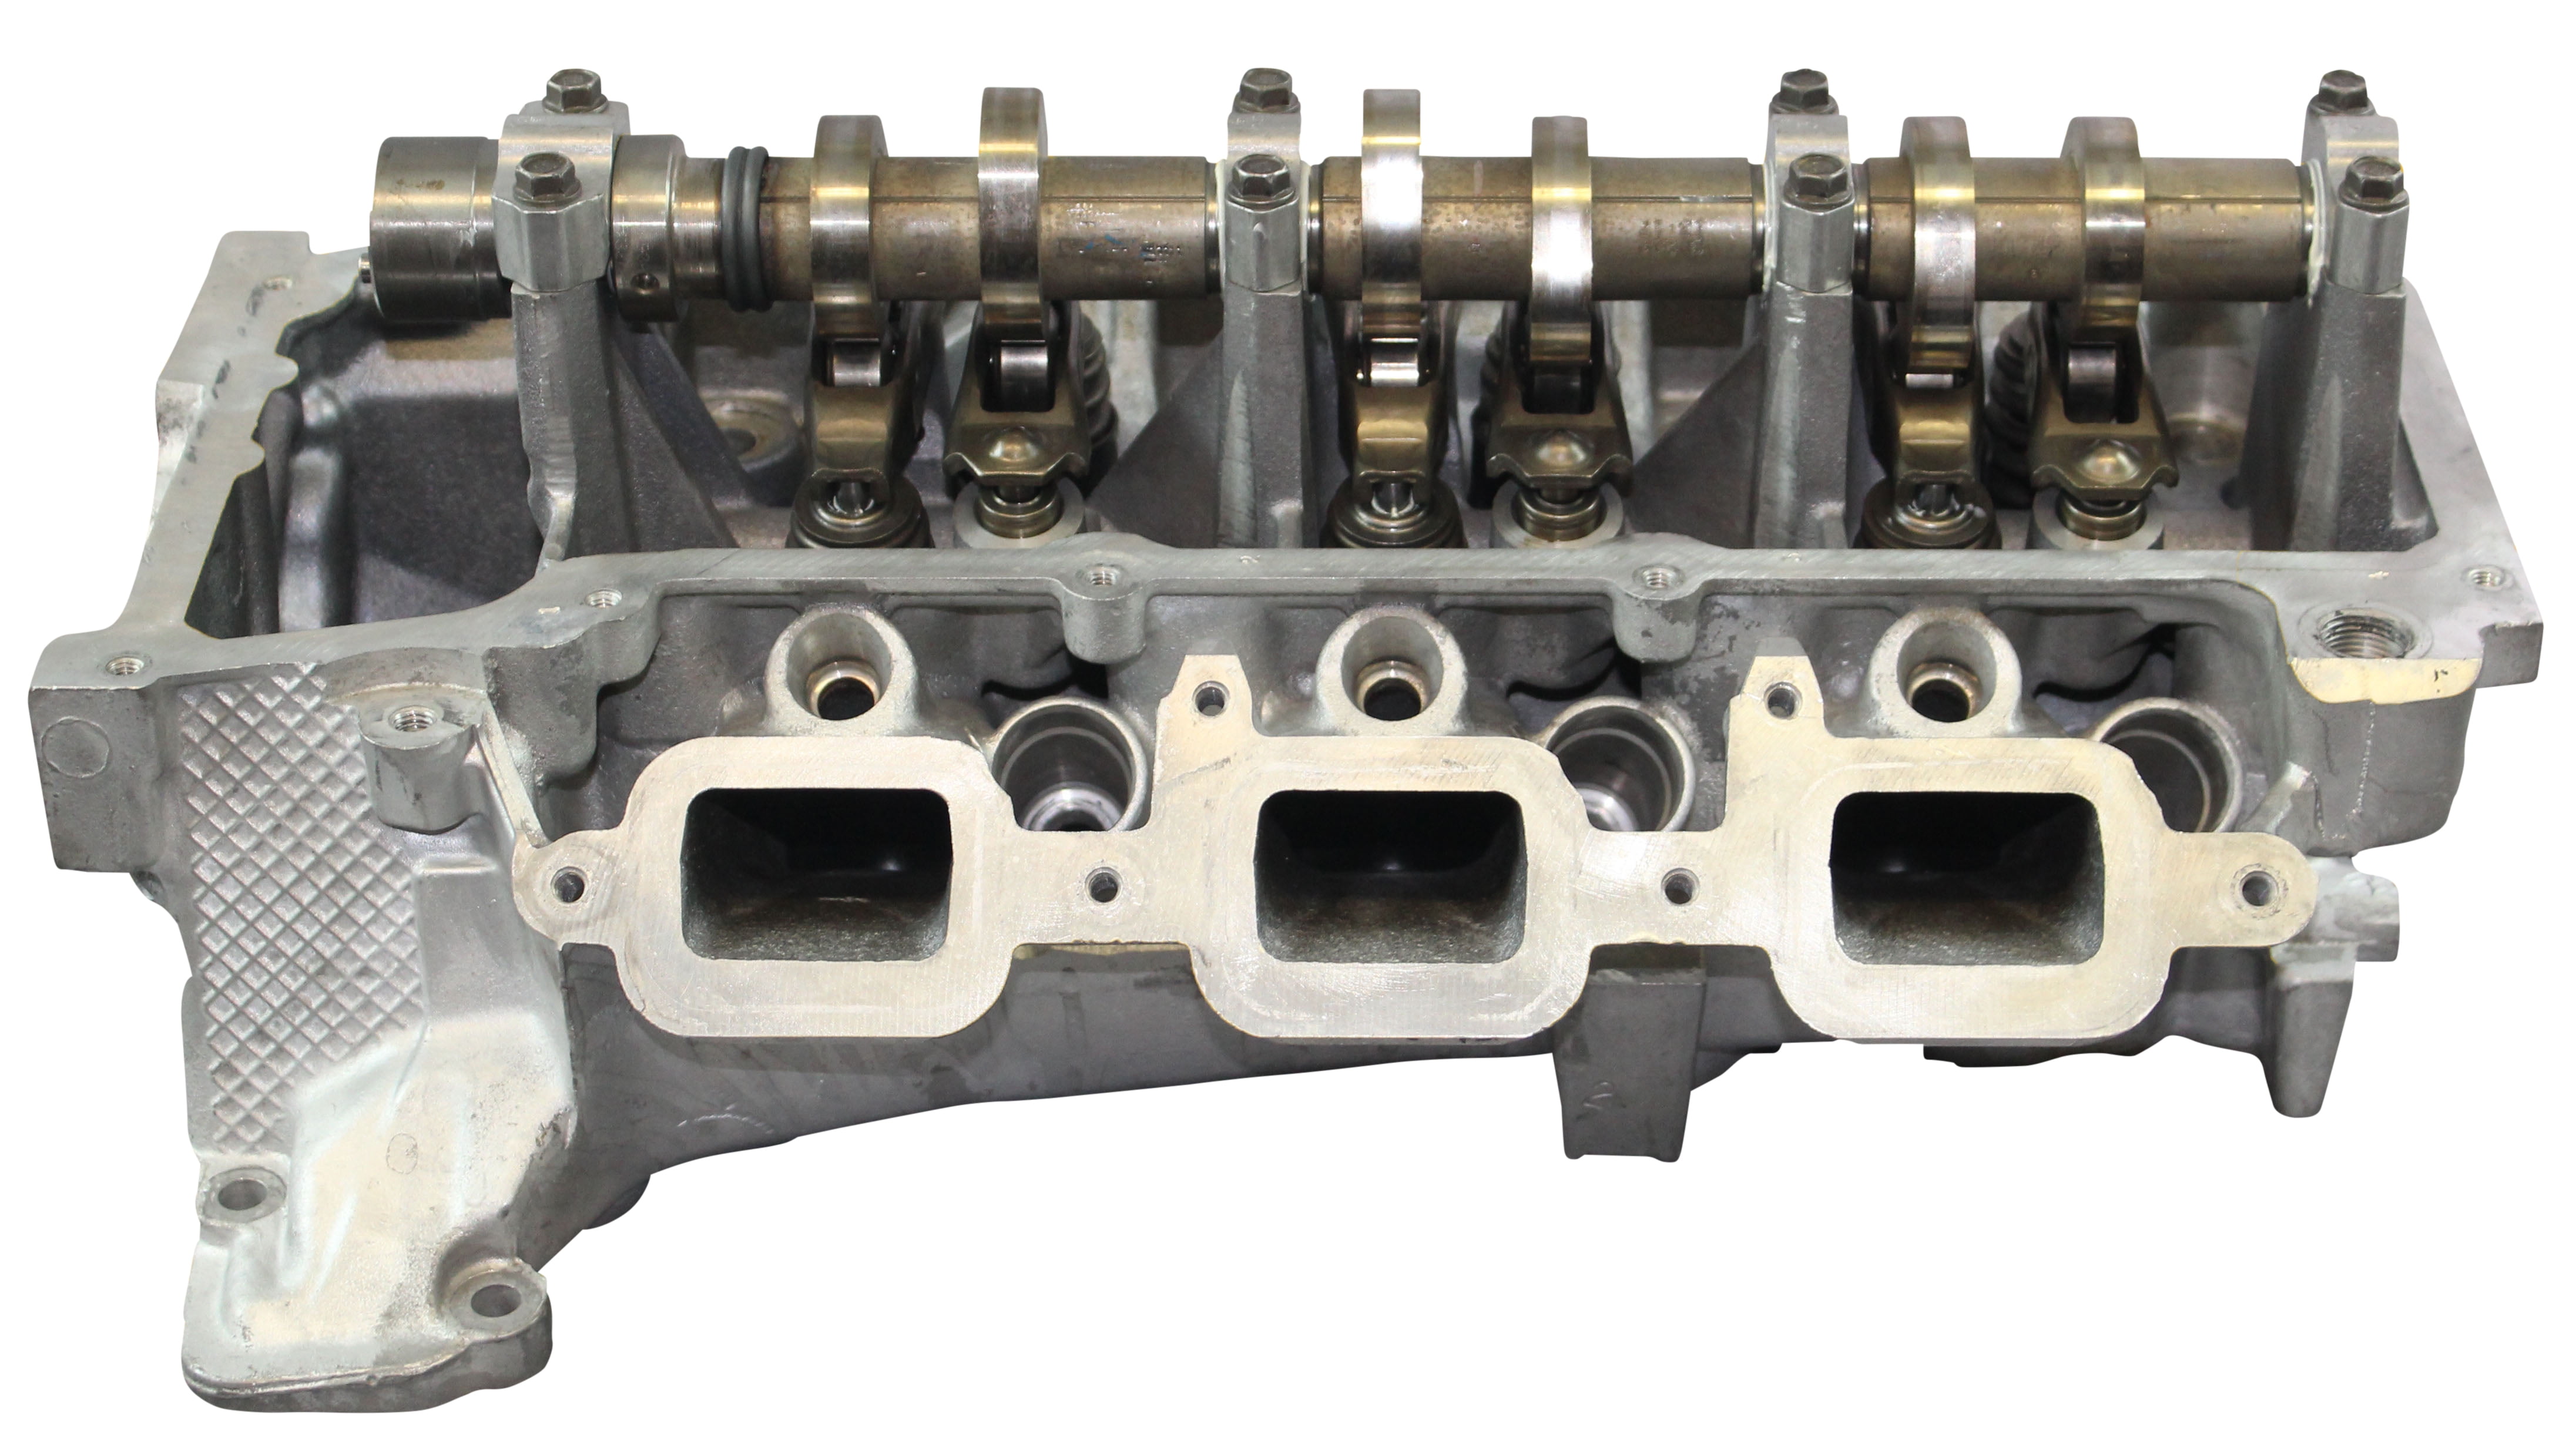 Jeep Liberty 3.7 Cylinder Heads RIGHT SIDE Dodge Durango